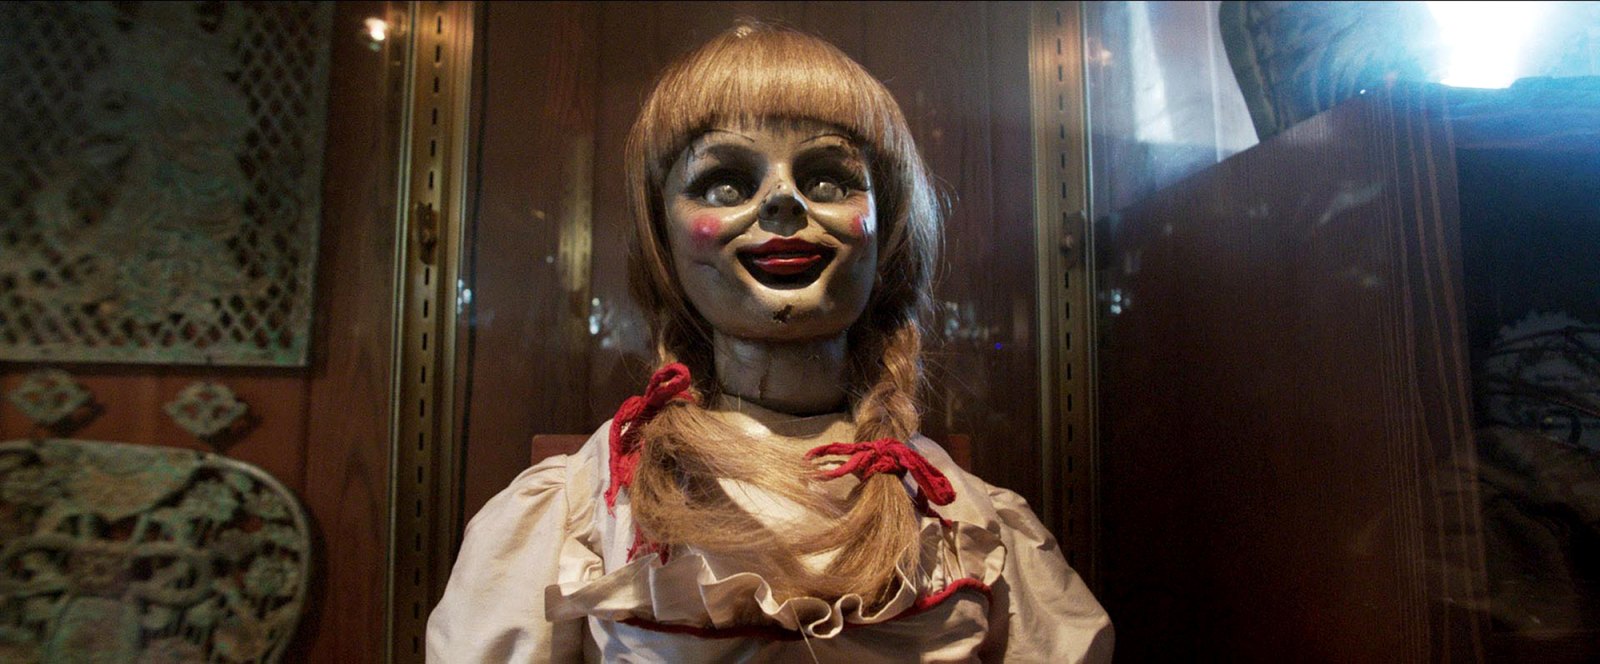 How To Watch All of the 'Conjuring' Movies in Order